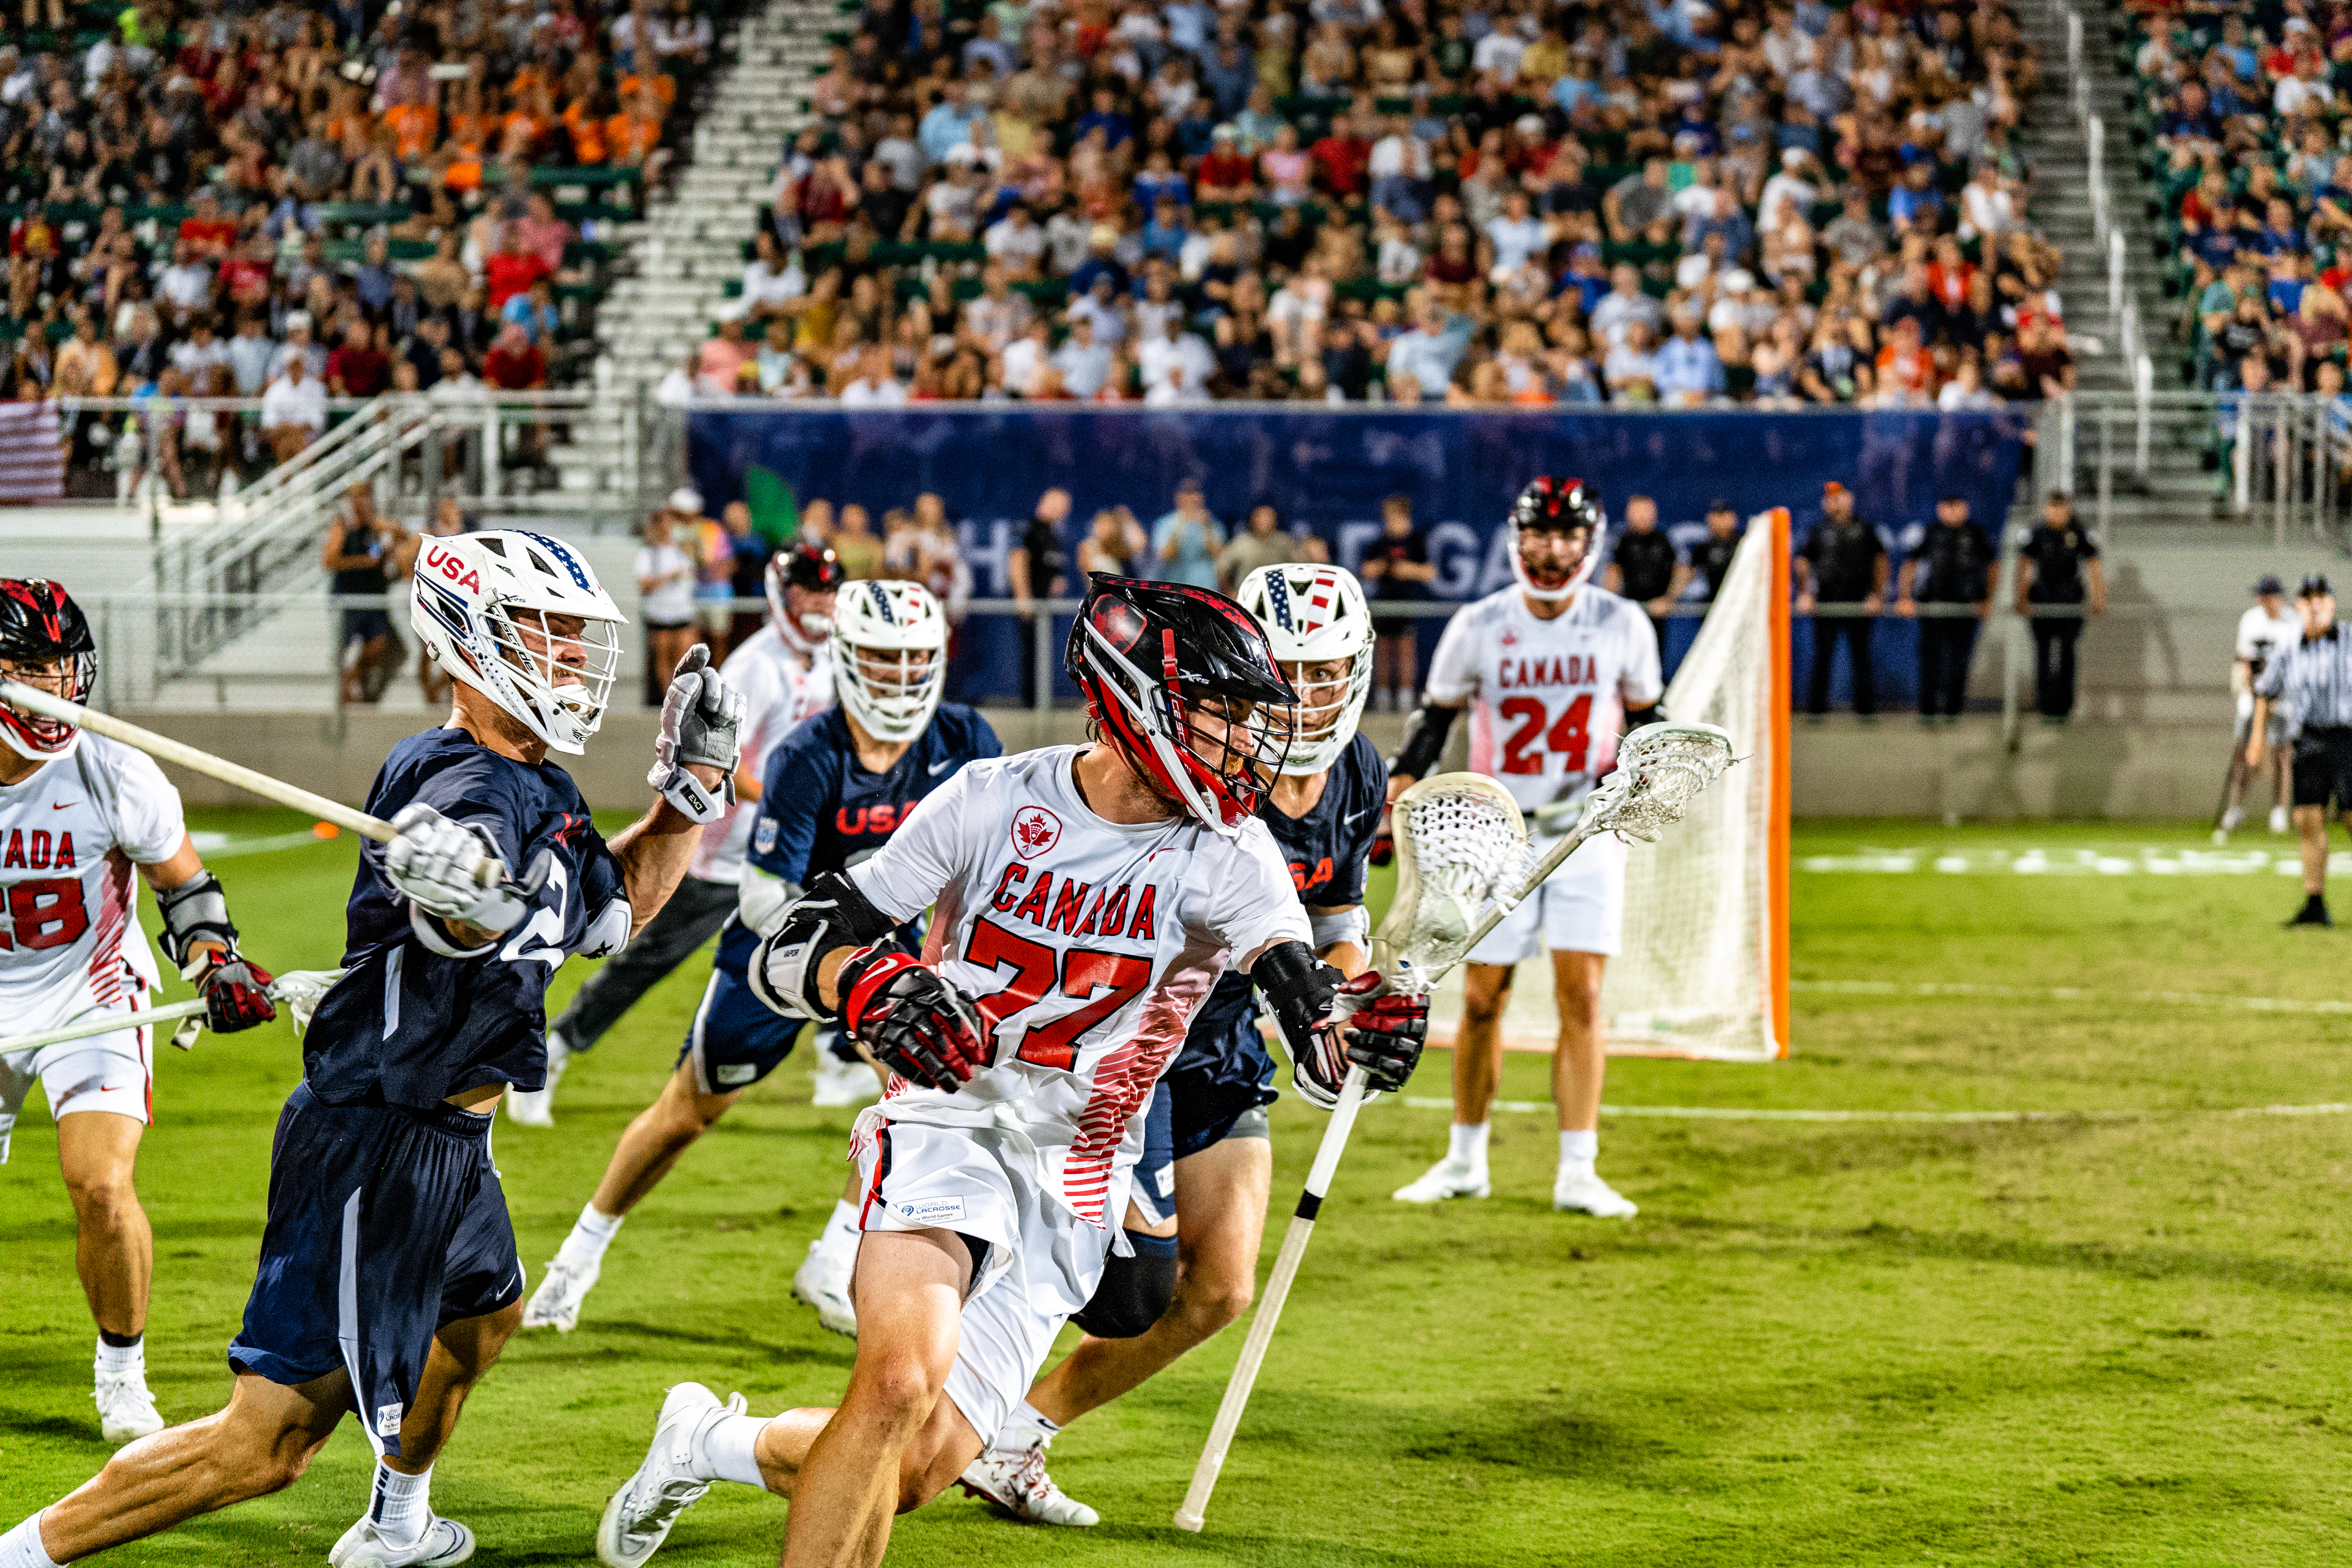 Canada plays the United States in the gold medal match of men’s lacrosse at PNC Field. Photo Credit: The World Games 2022